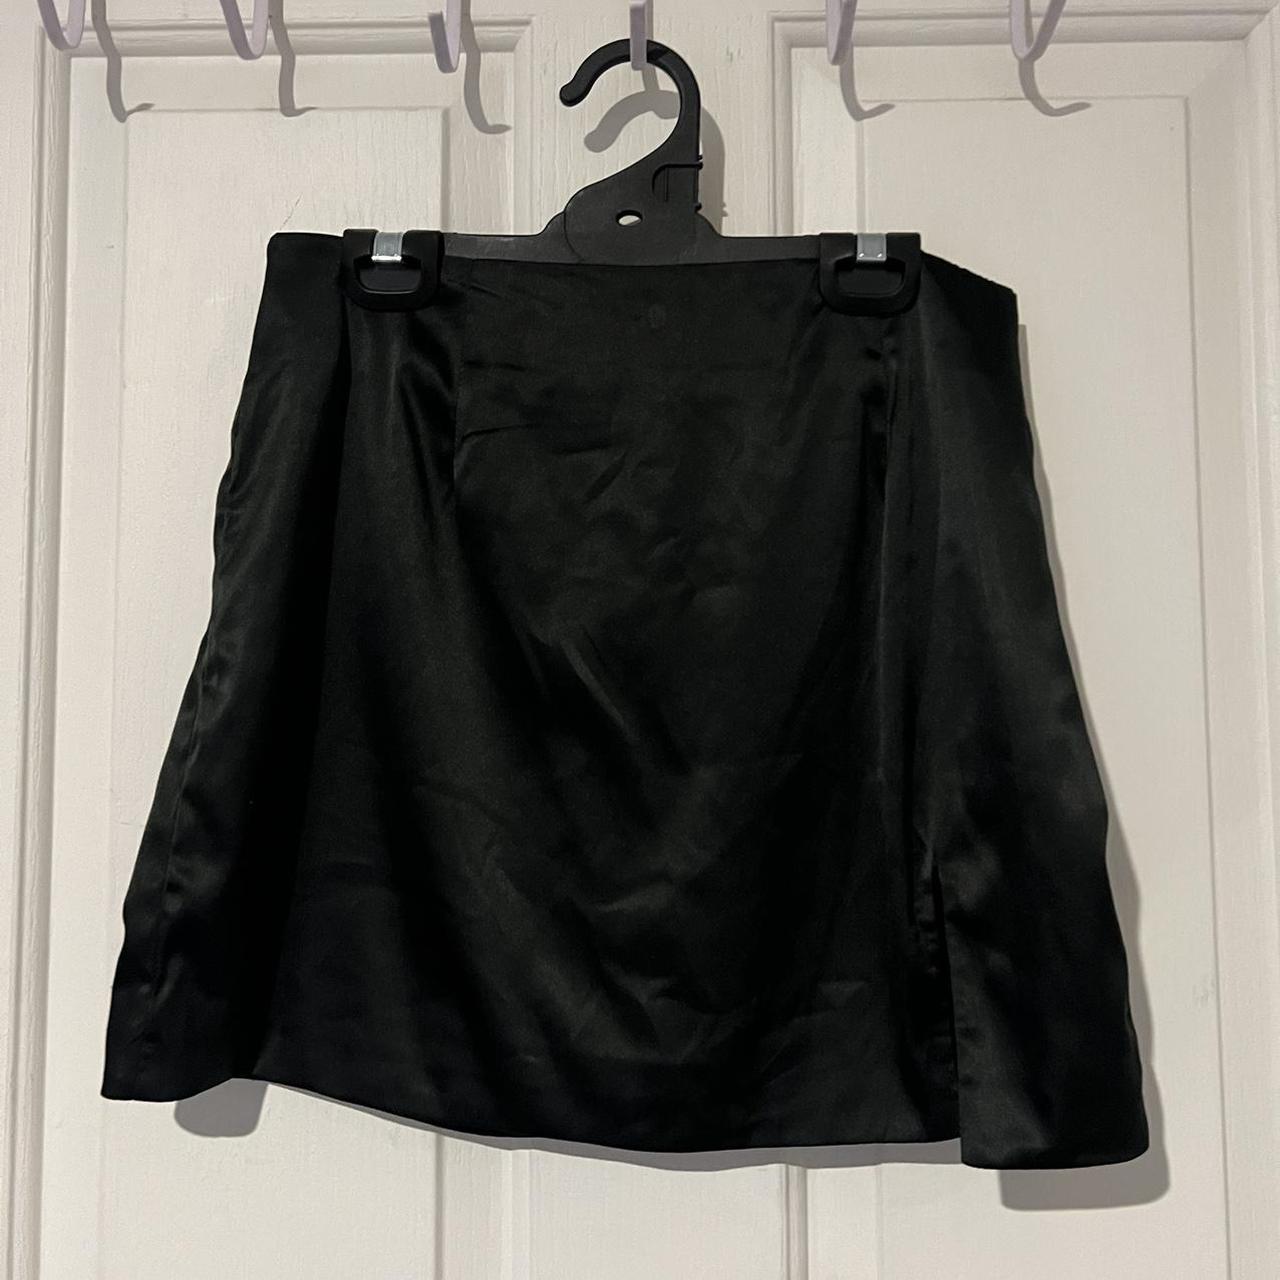 Charcoal clothing silk skirt In excellent... - Depop